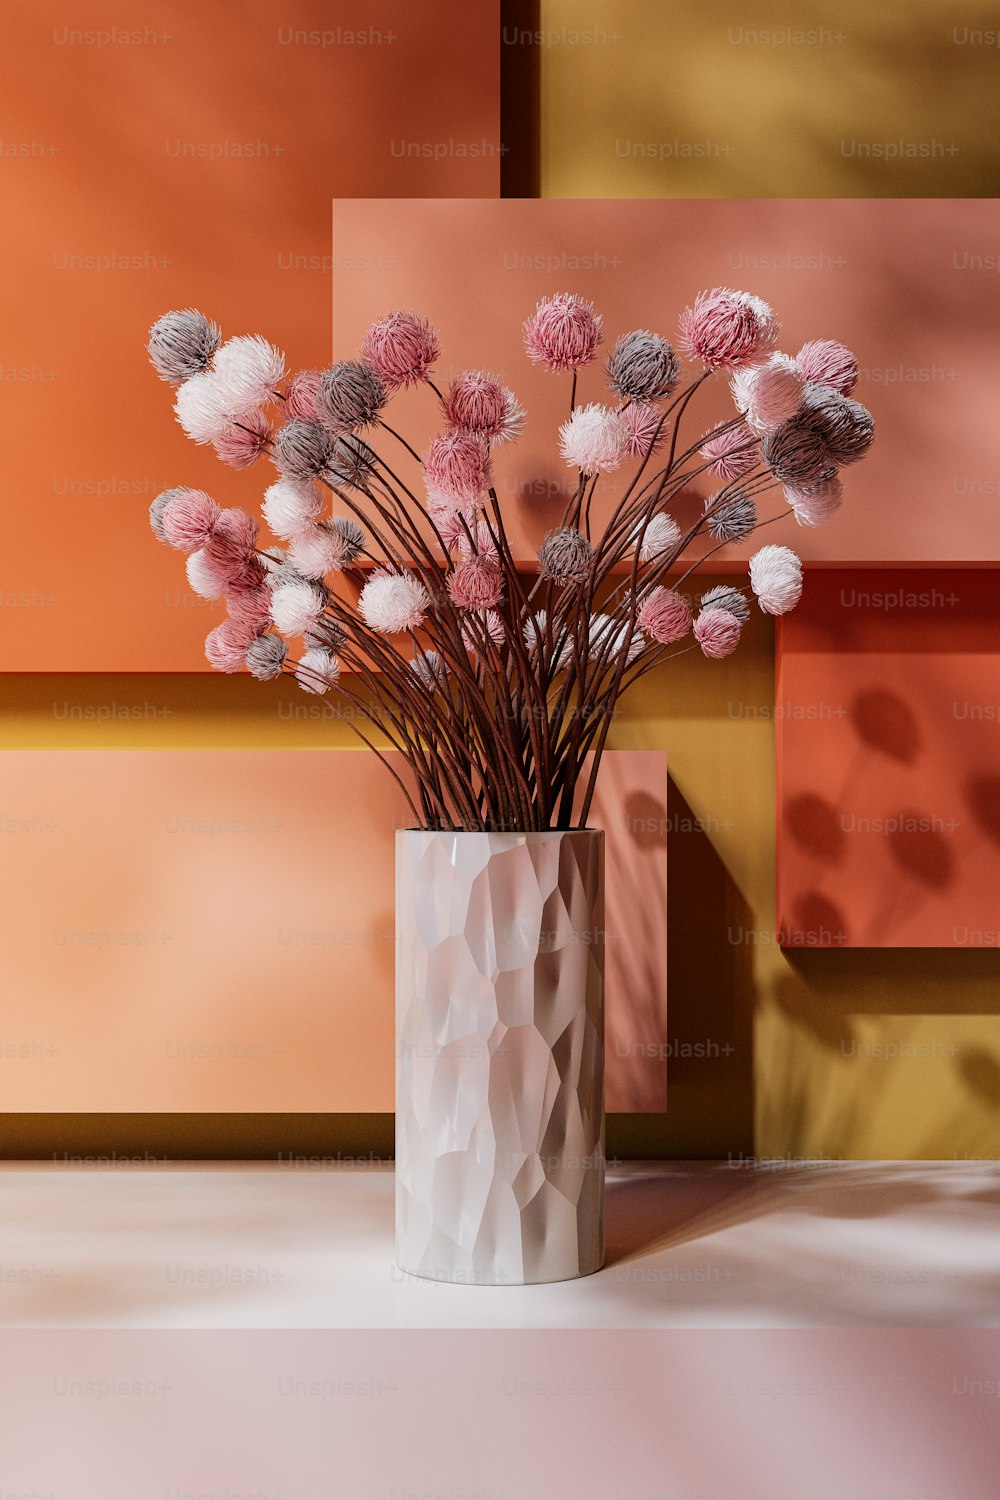 a white vase filled with pink and white flowers